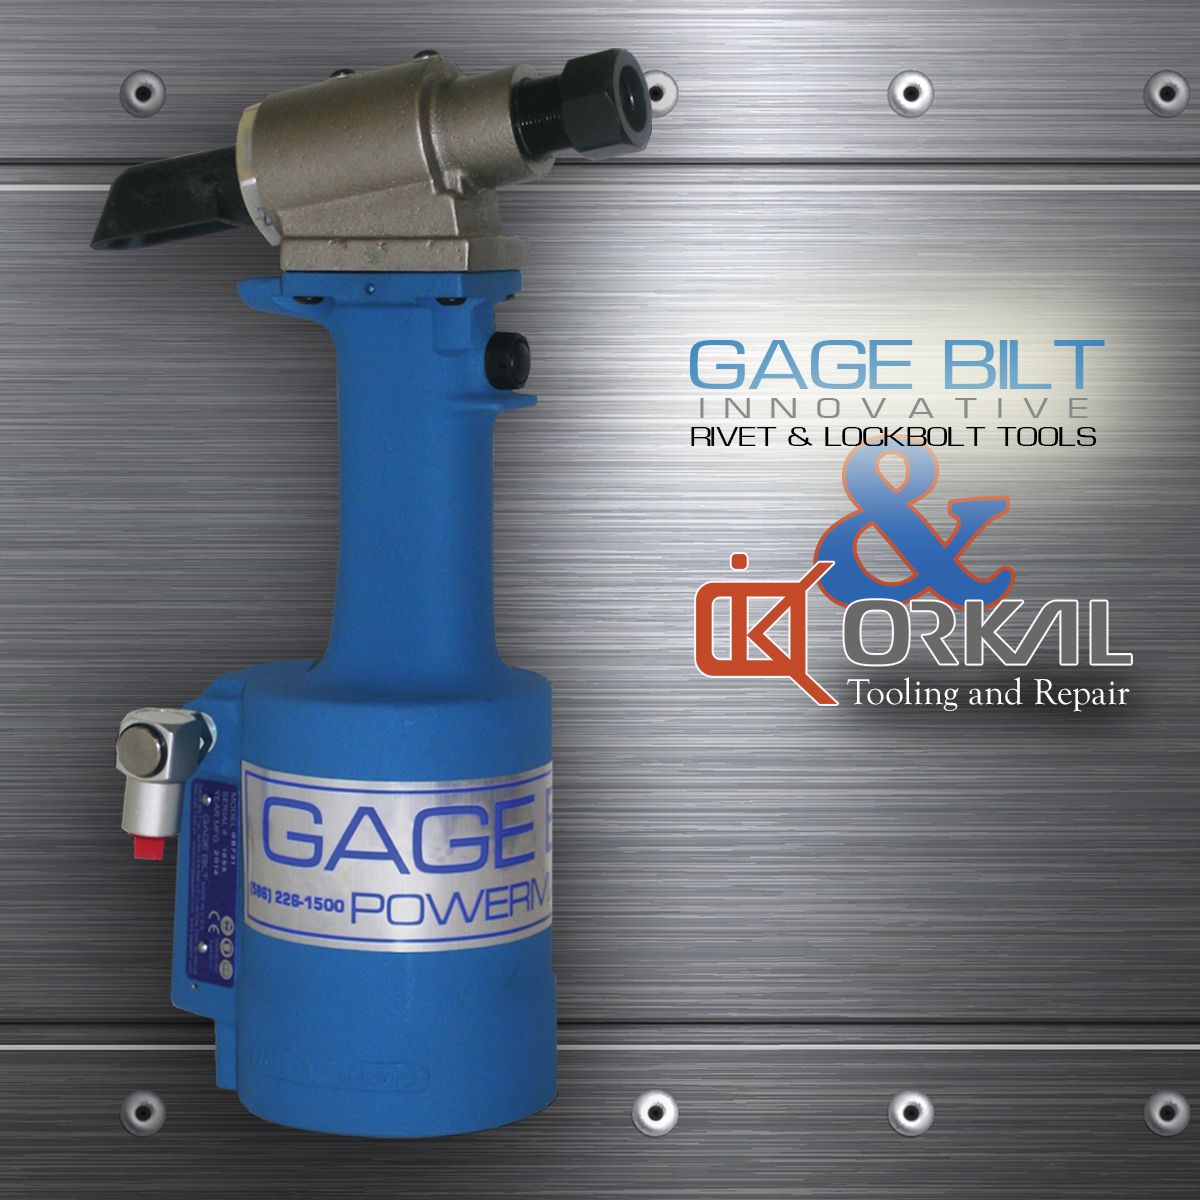 a blue and silver pneumatic rivet gun, part of a partnership with gage bilt, featuring logos for gage bilt and orkal against a textured metal background.